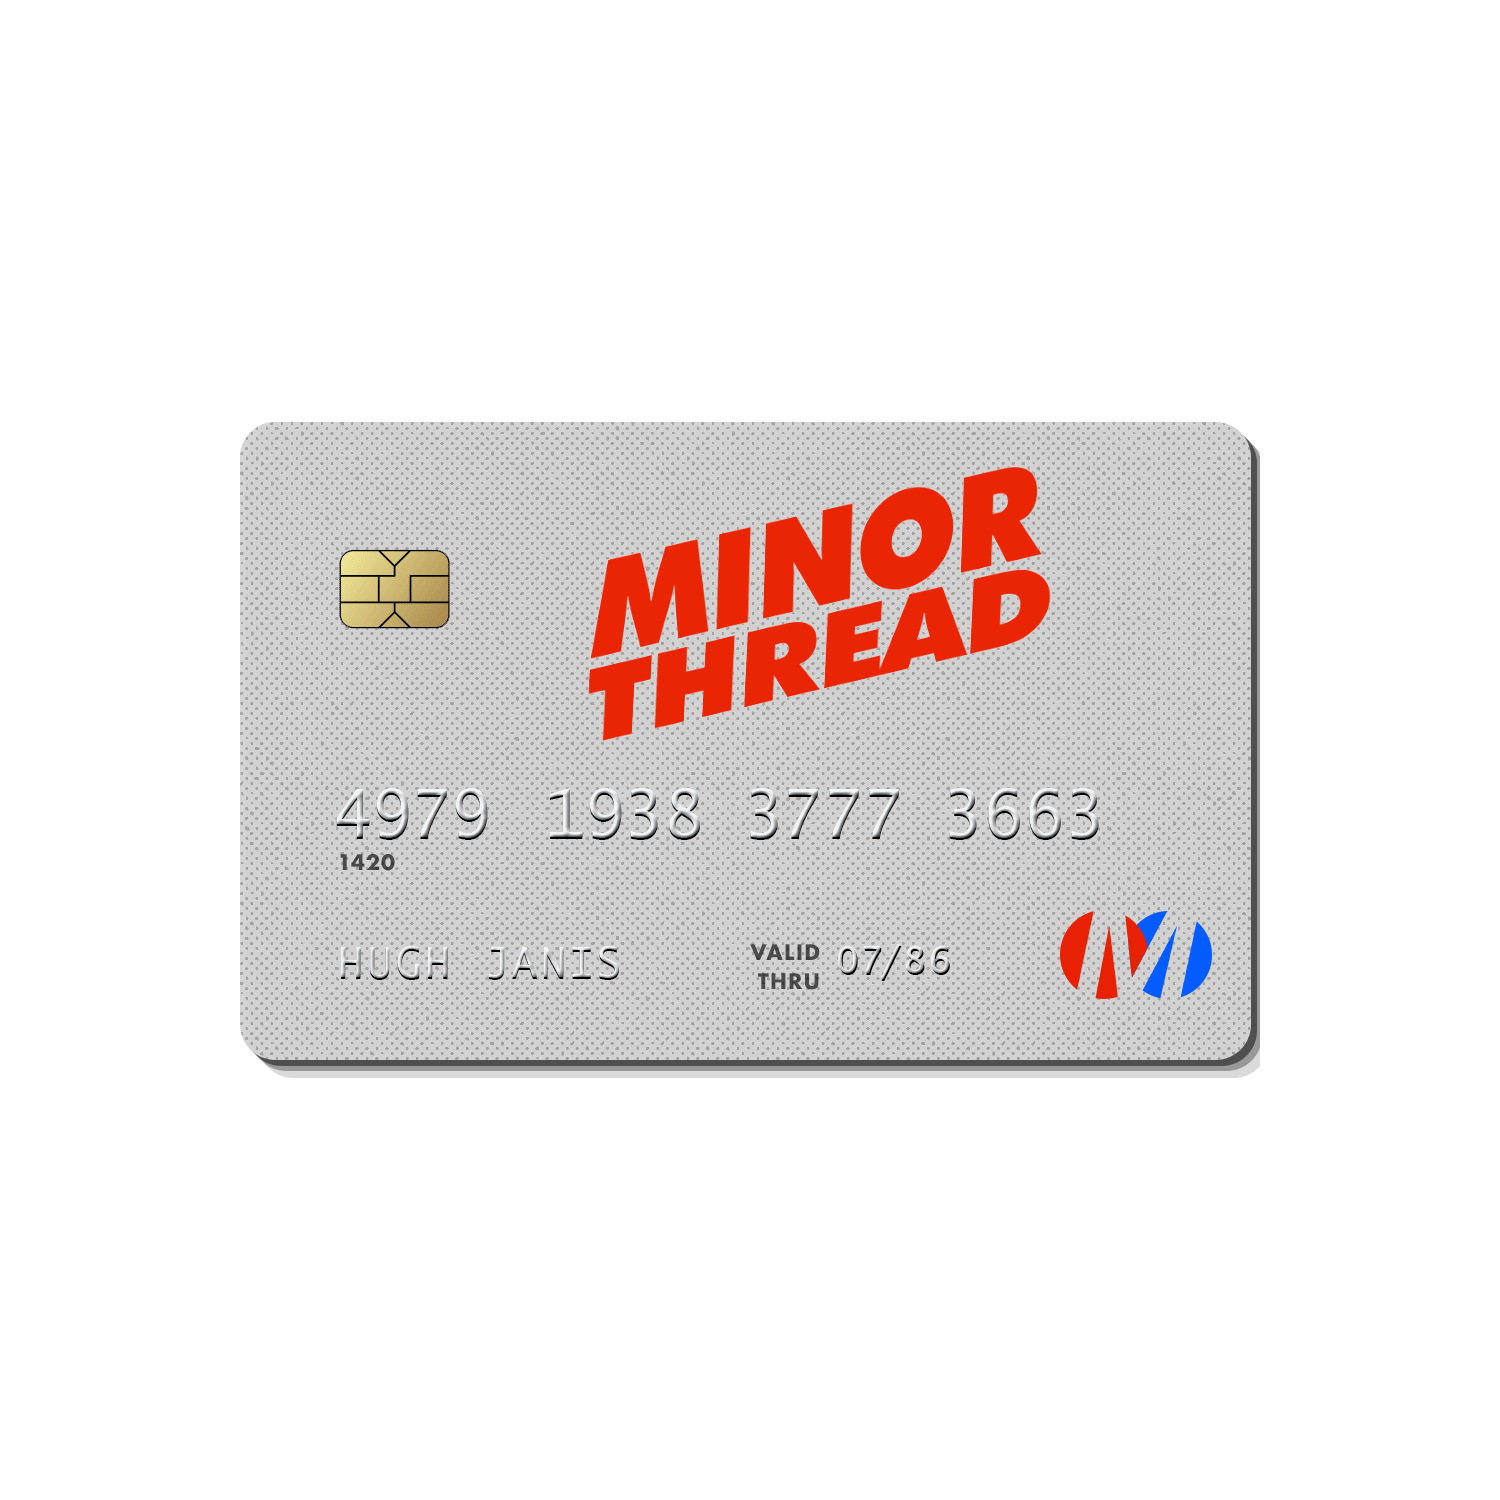 Minorthread Gift Card - For Those Who Are In Need Of A Gift And Have No Idea What to Get.